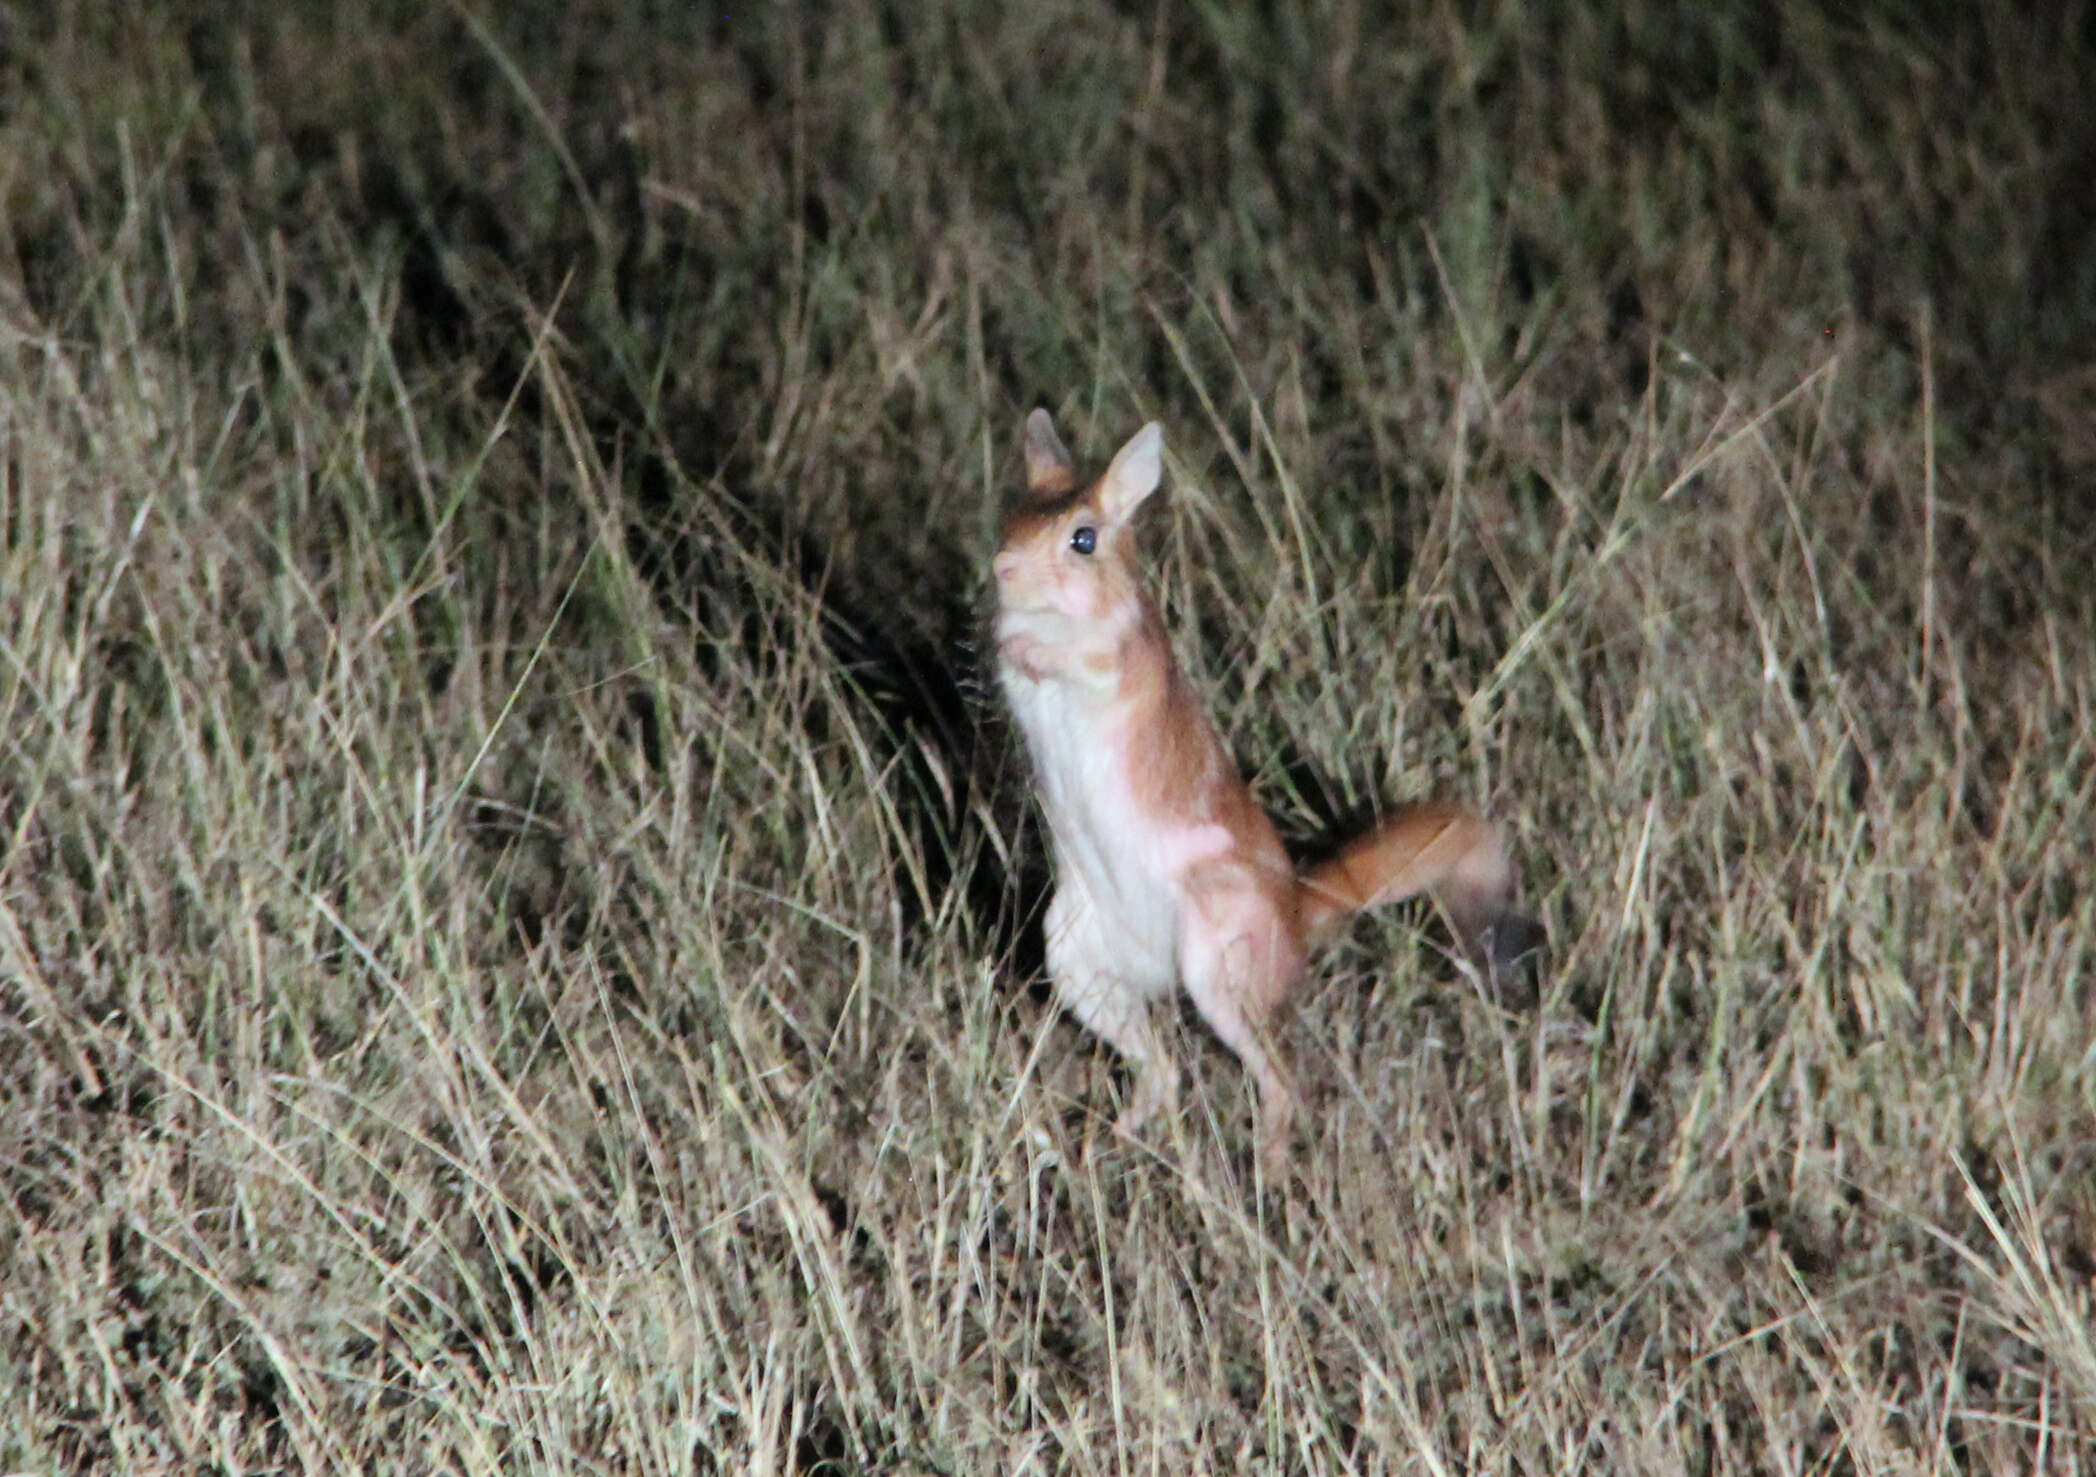 Image of East African Spring Hare